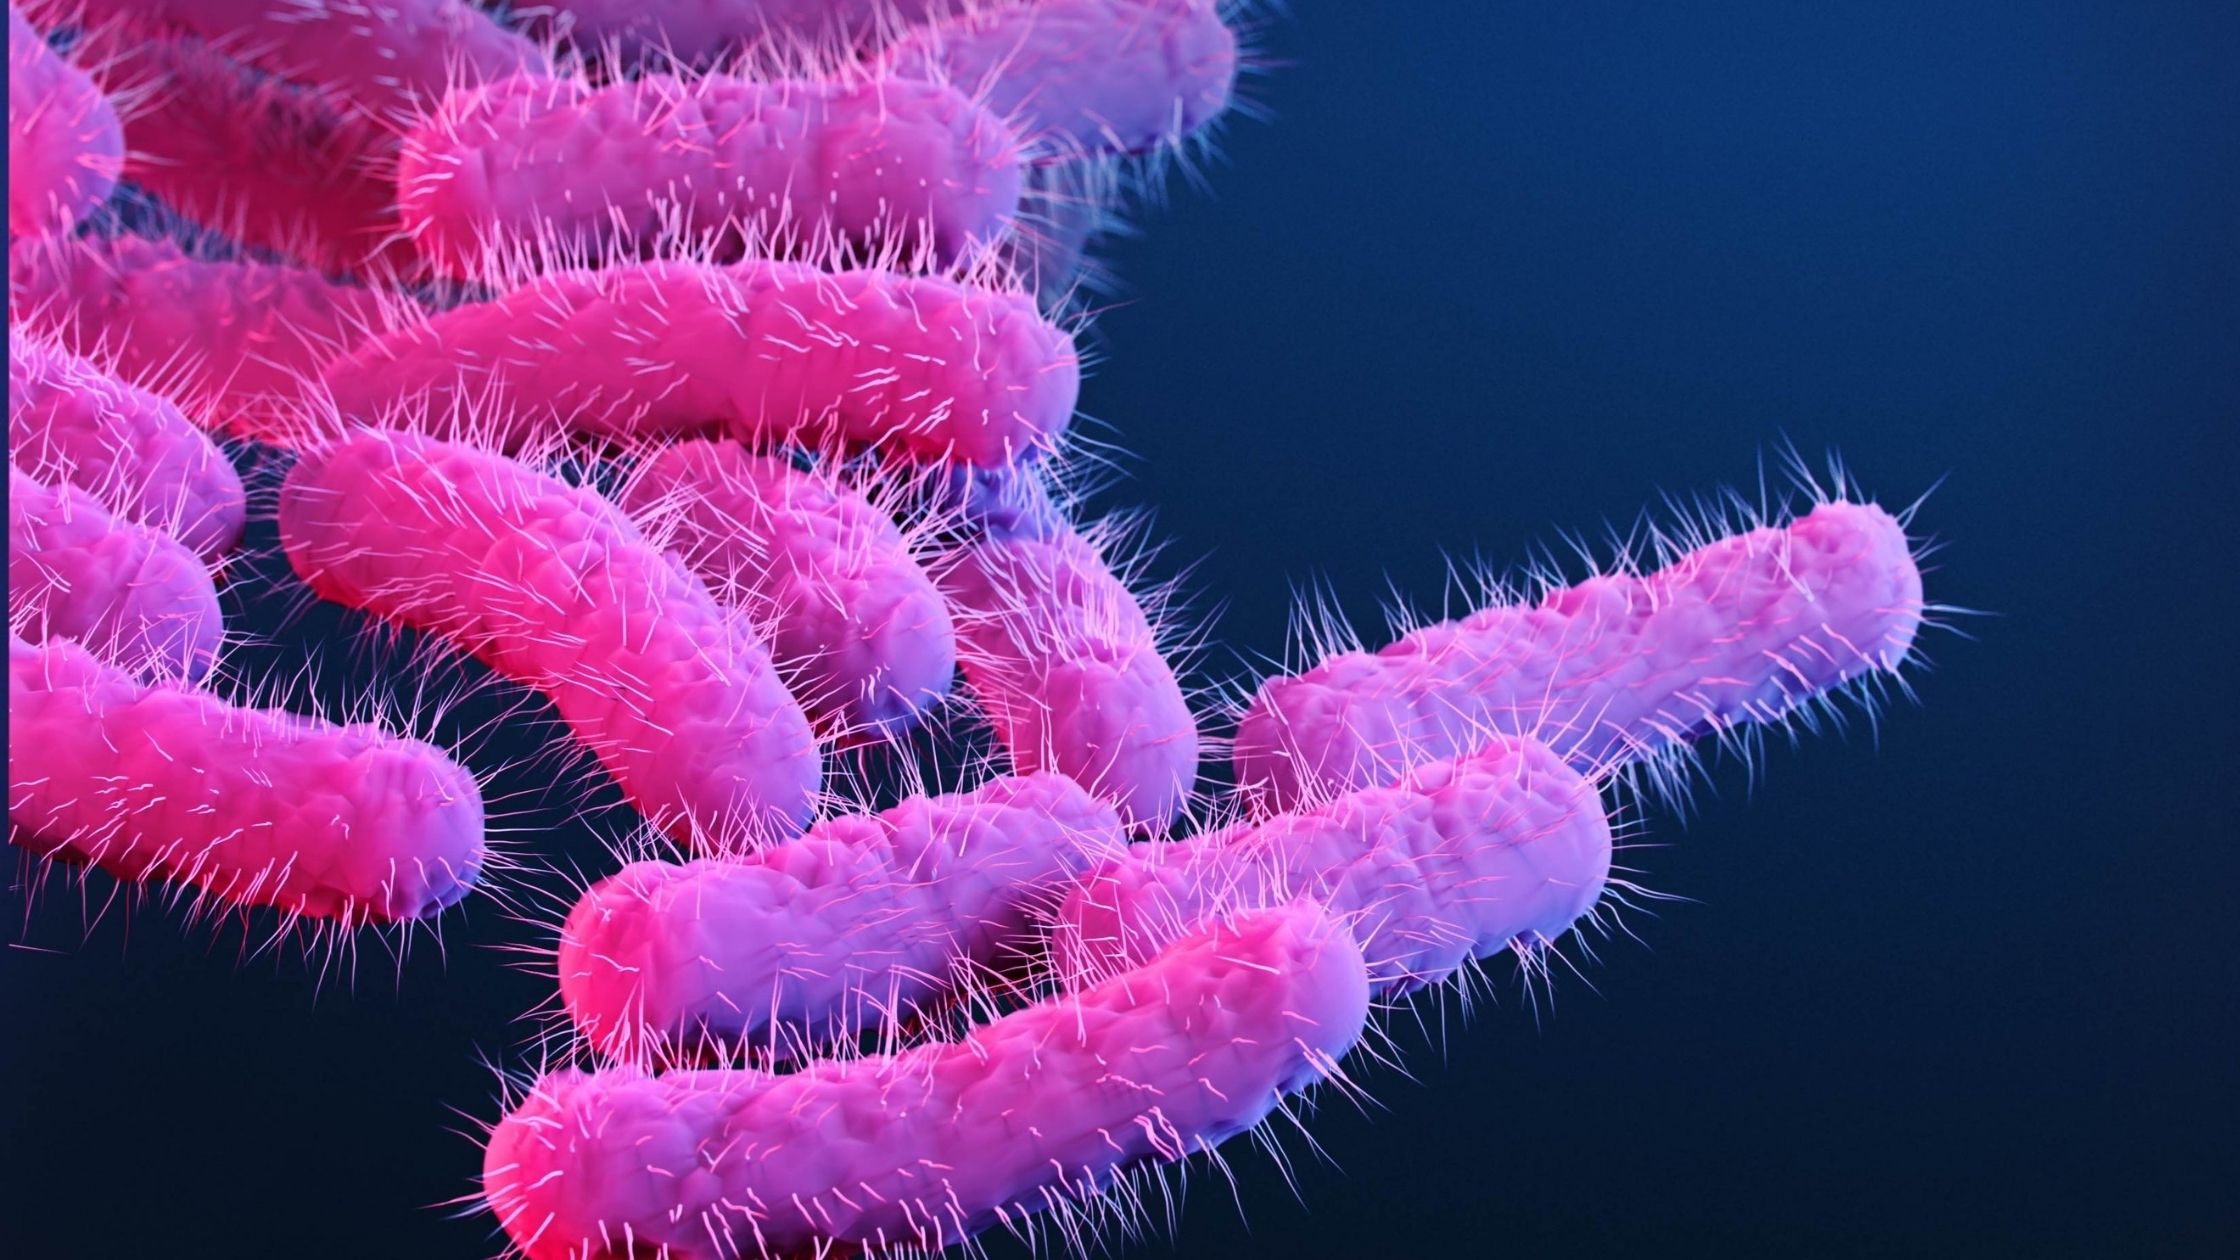 Top 16 Infectious and Deadliest Diseases Caused By Bacteria